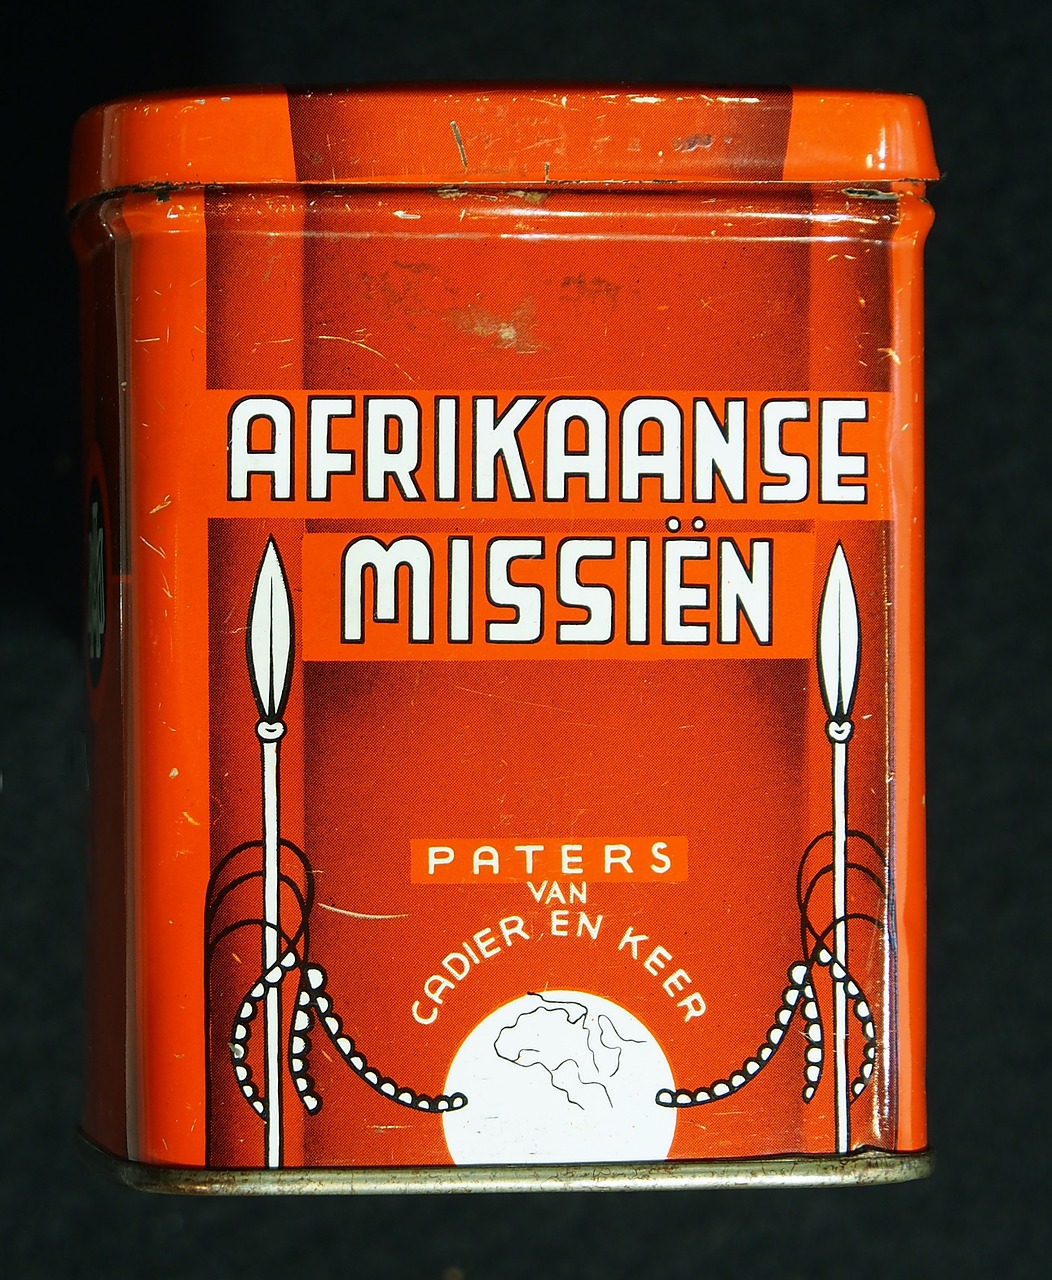 afrikaanse missien collecting box can free photo